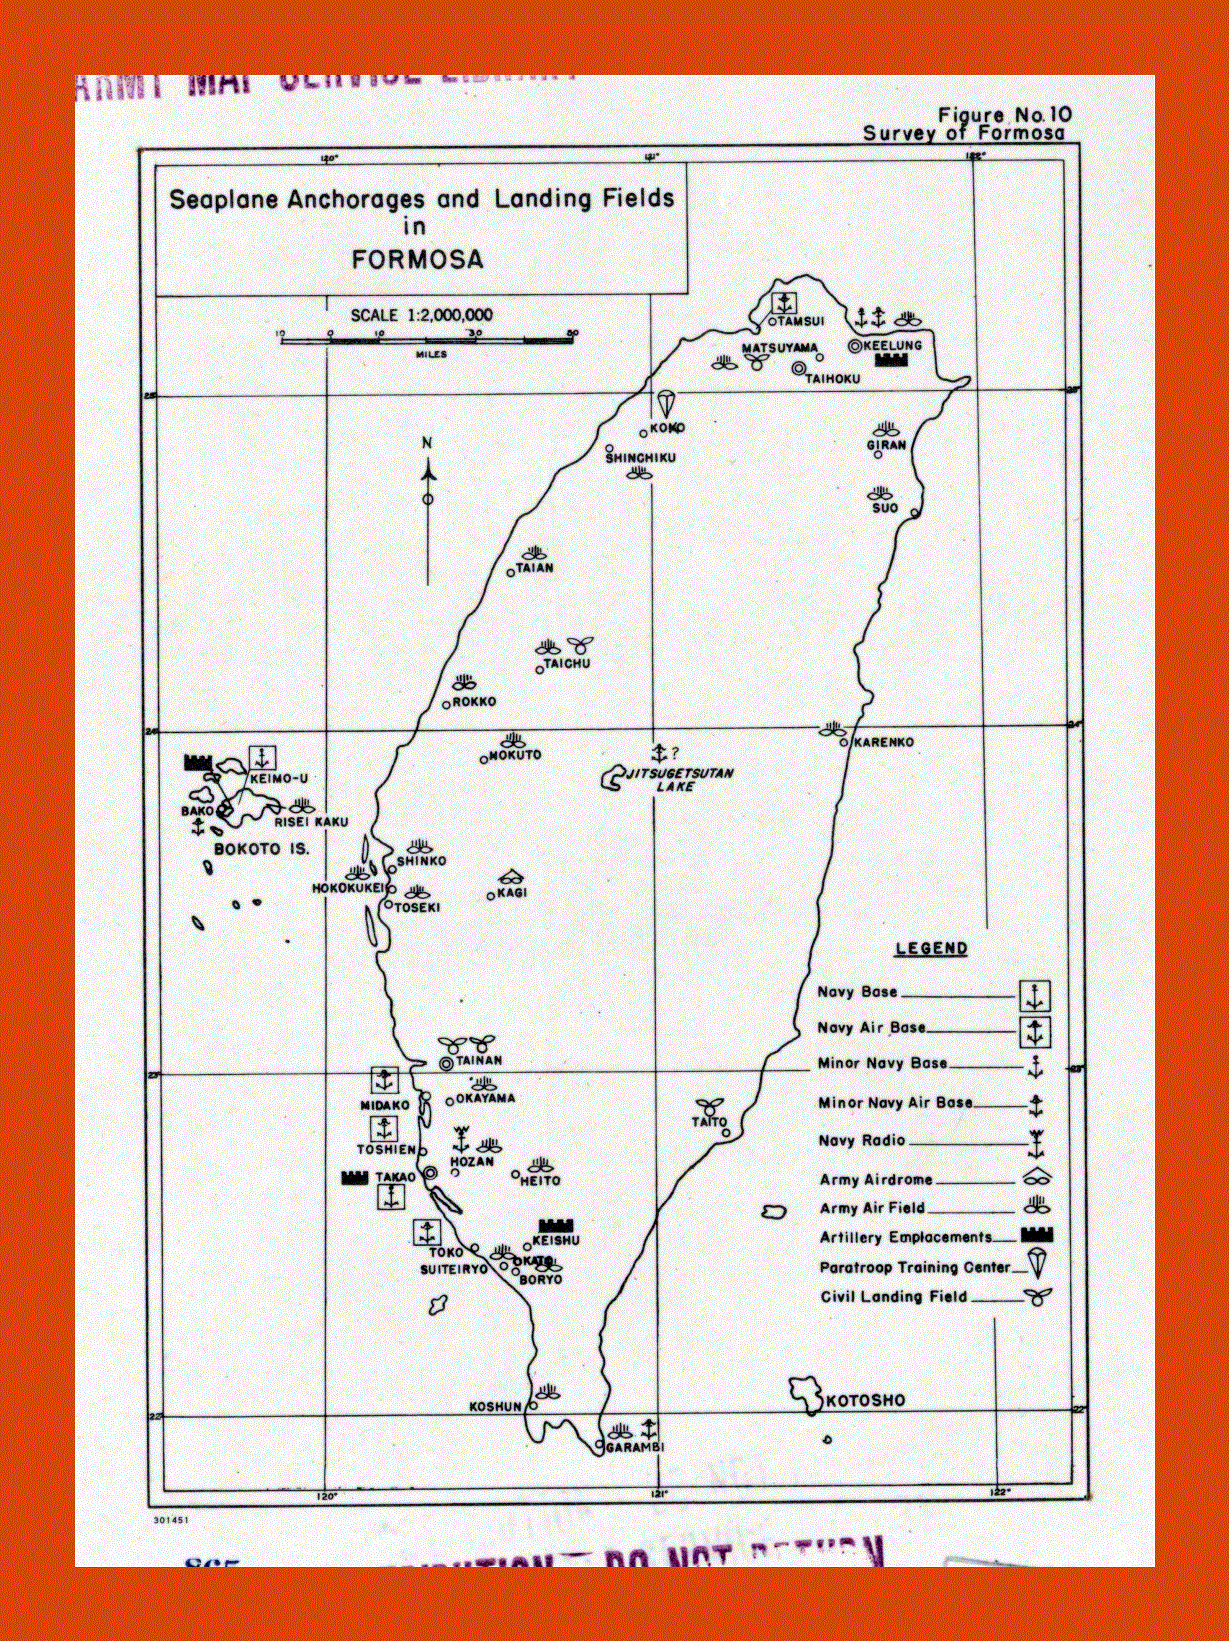 Map of Seaplane Anchorages and Landing Fields in Formosa - 195x